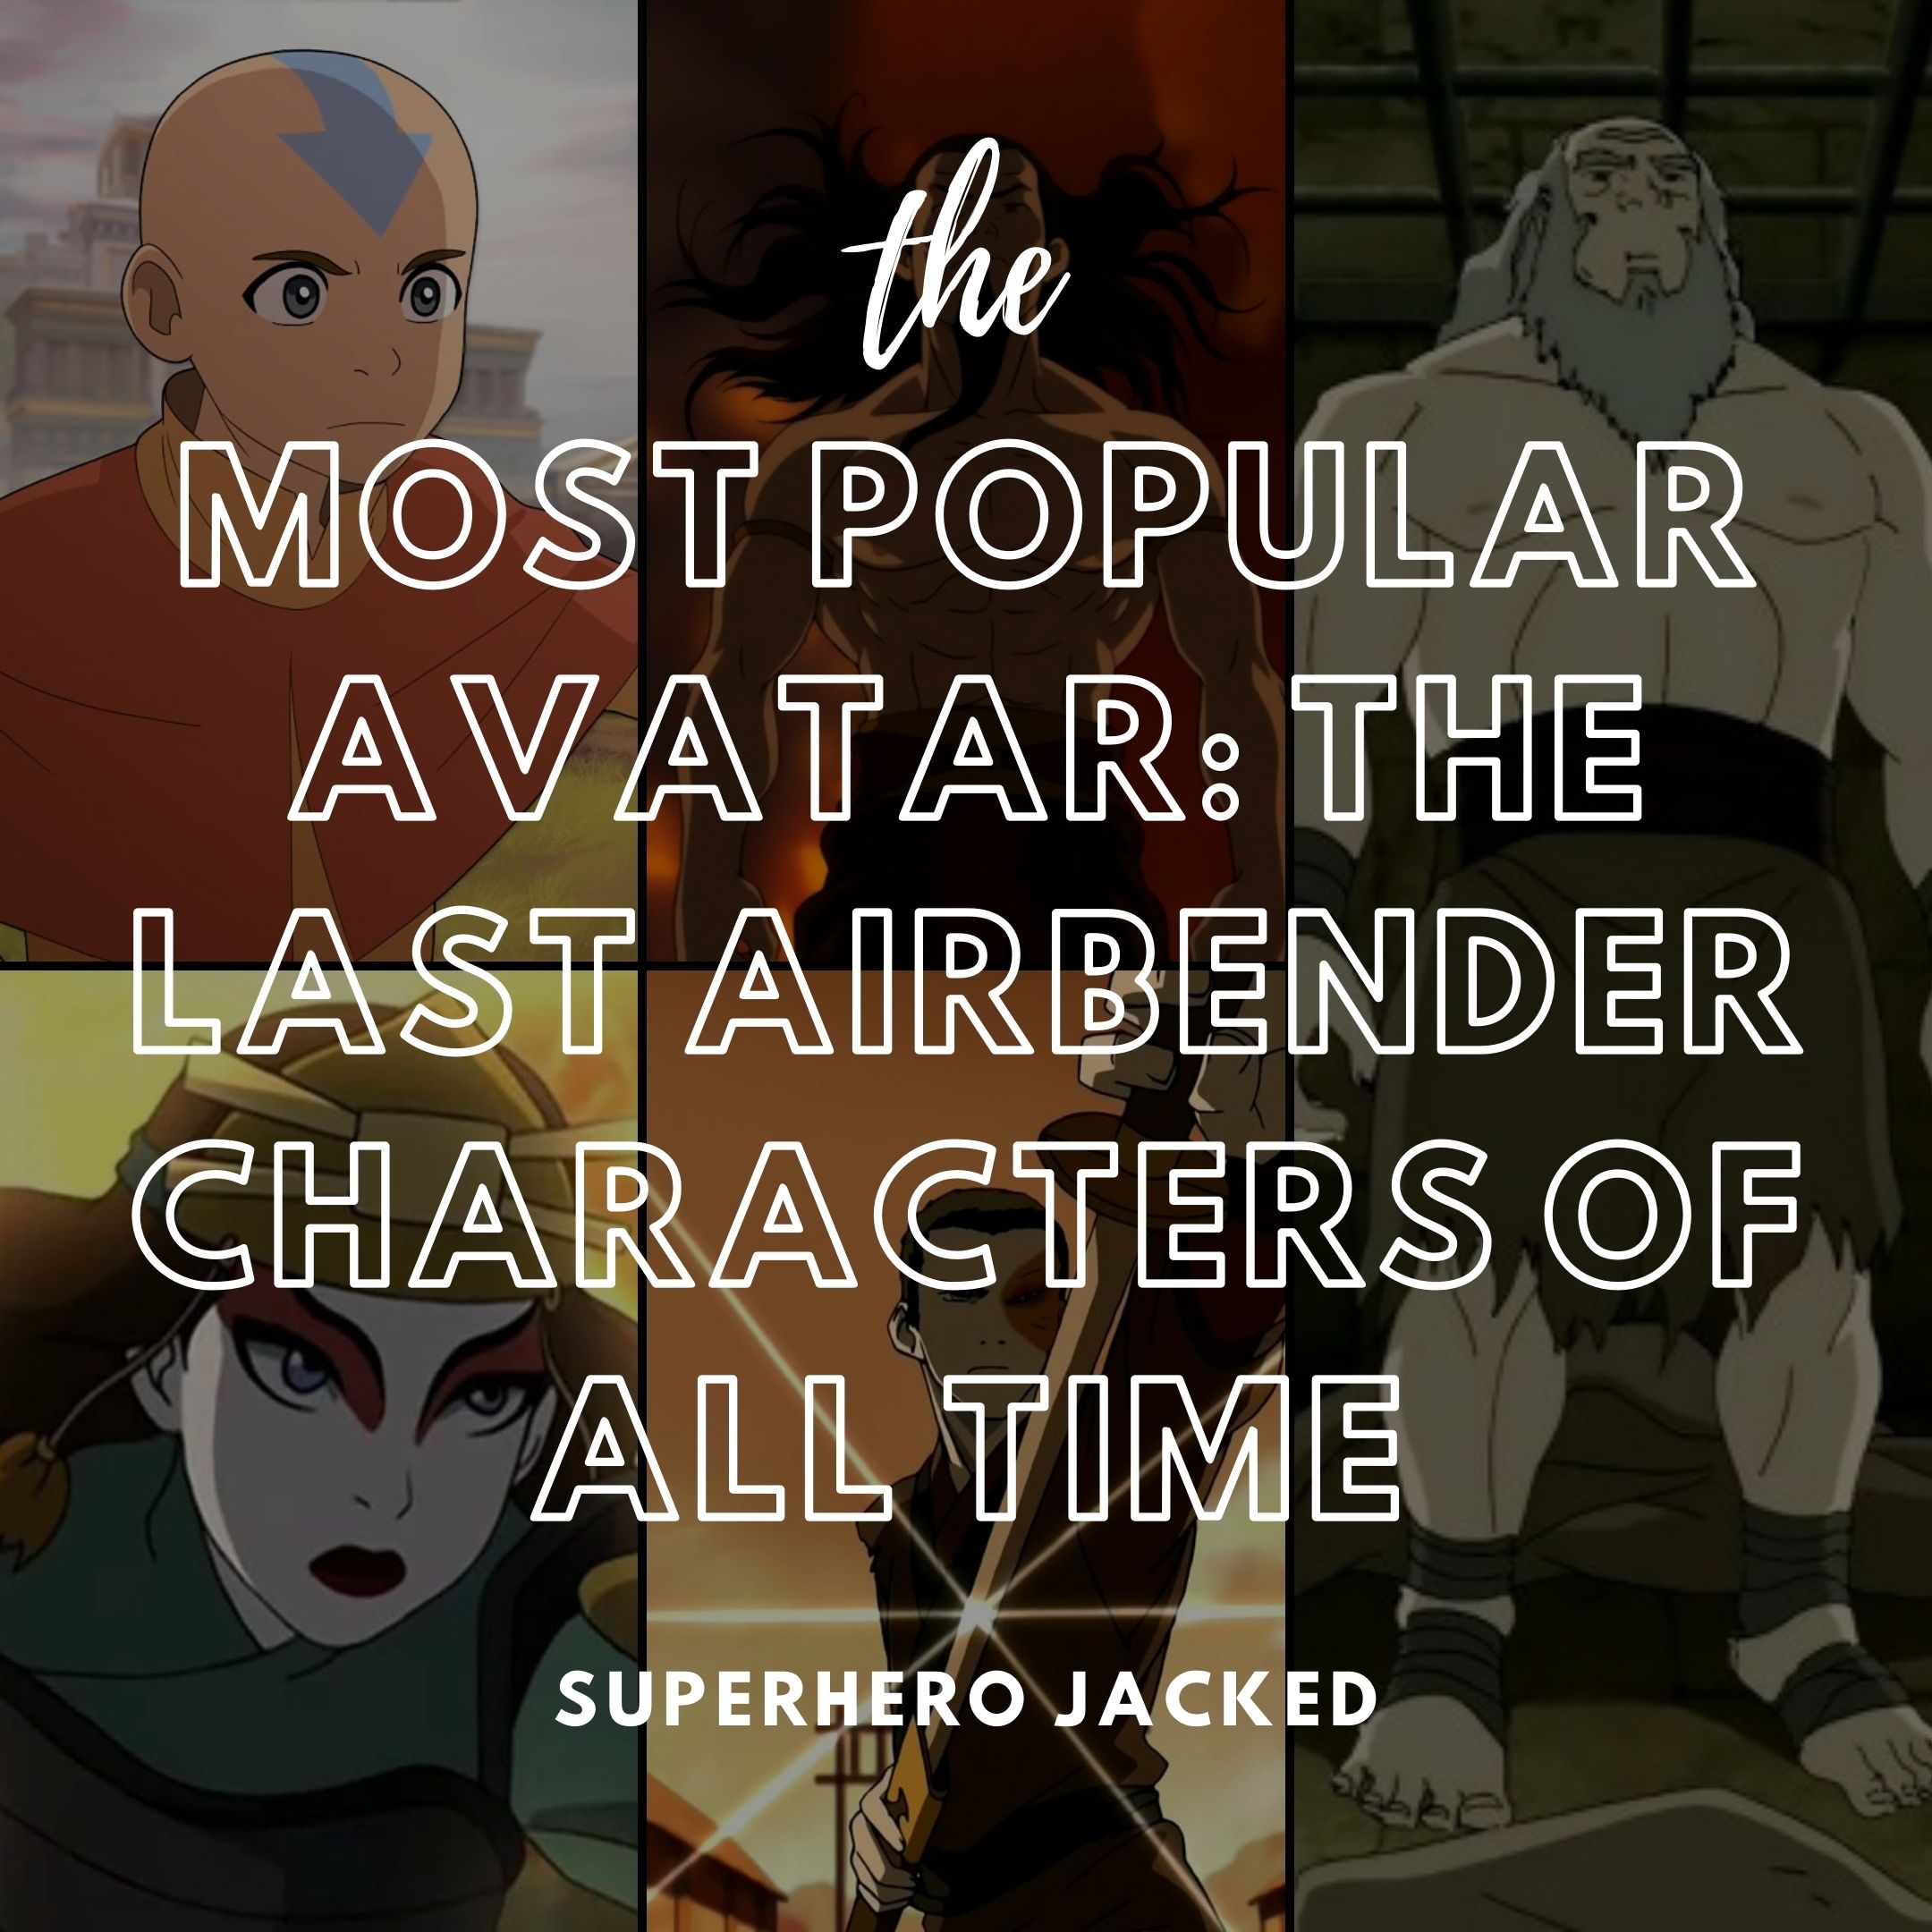 Avatar The Last Airbender  Which female character from the Avatar  universe inspires you most  Facebook